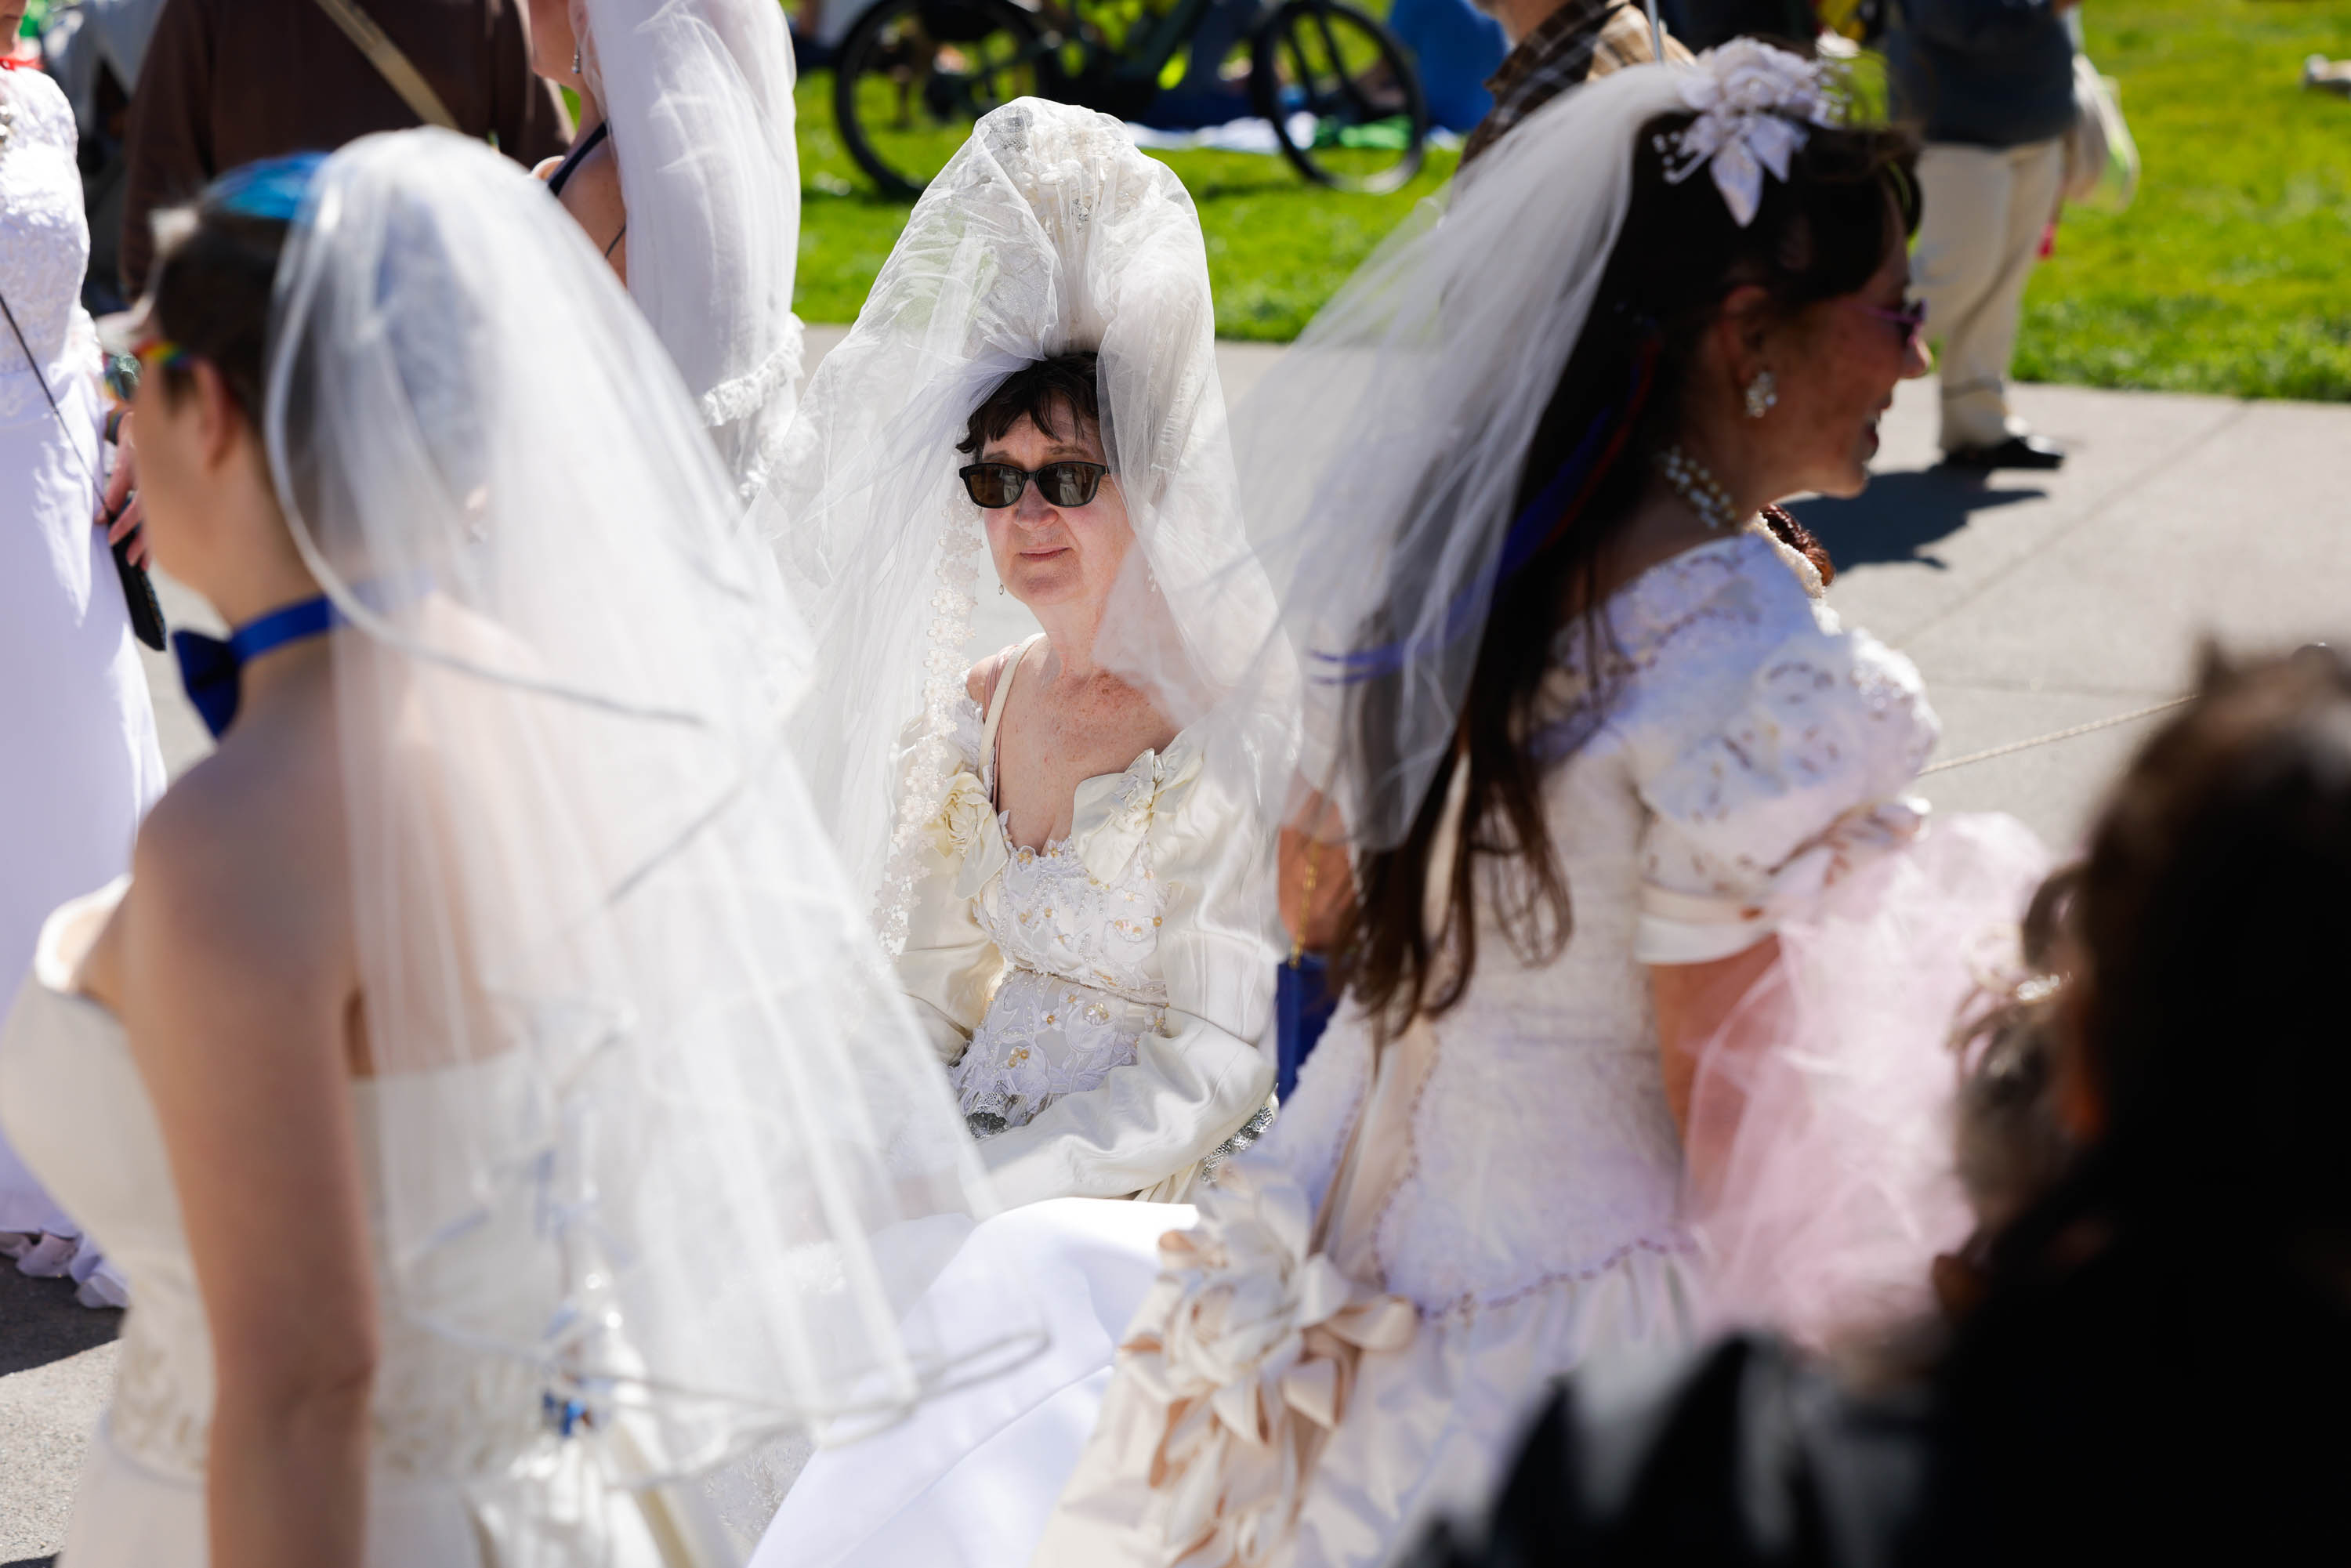 A group of people wearing various wedding dresses and veils gather outdoors.